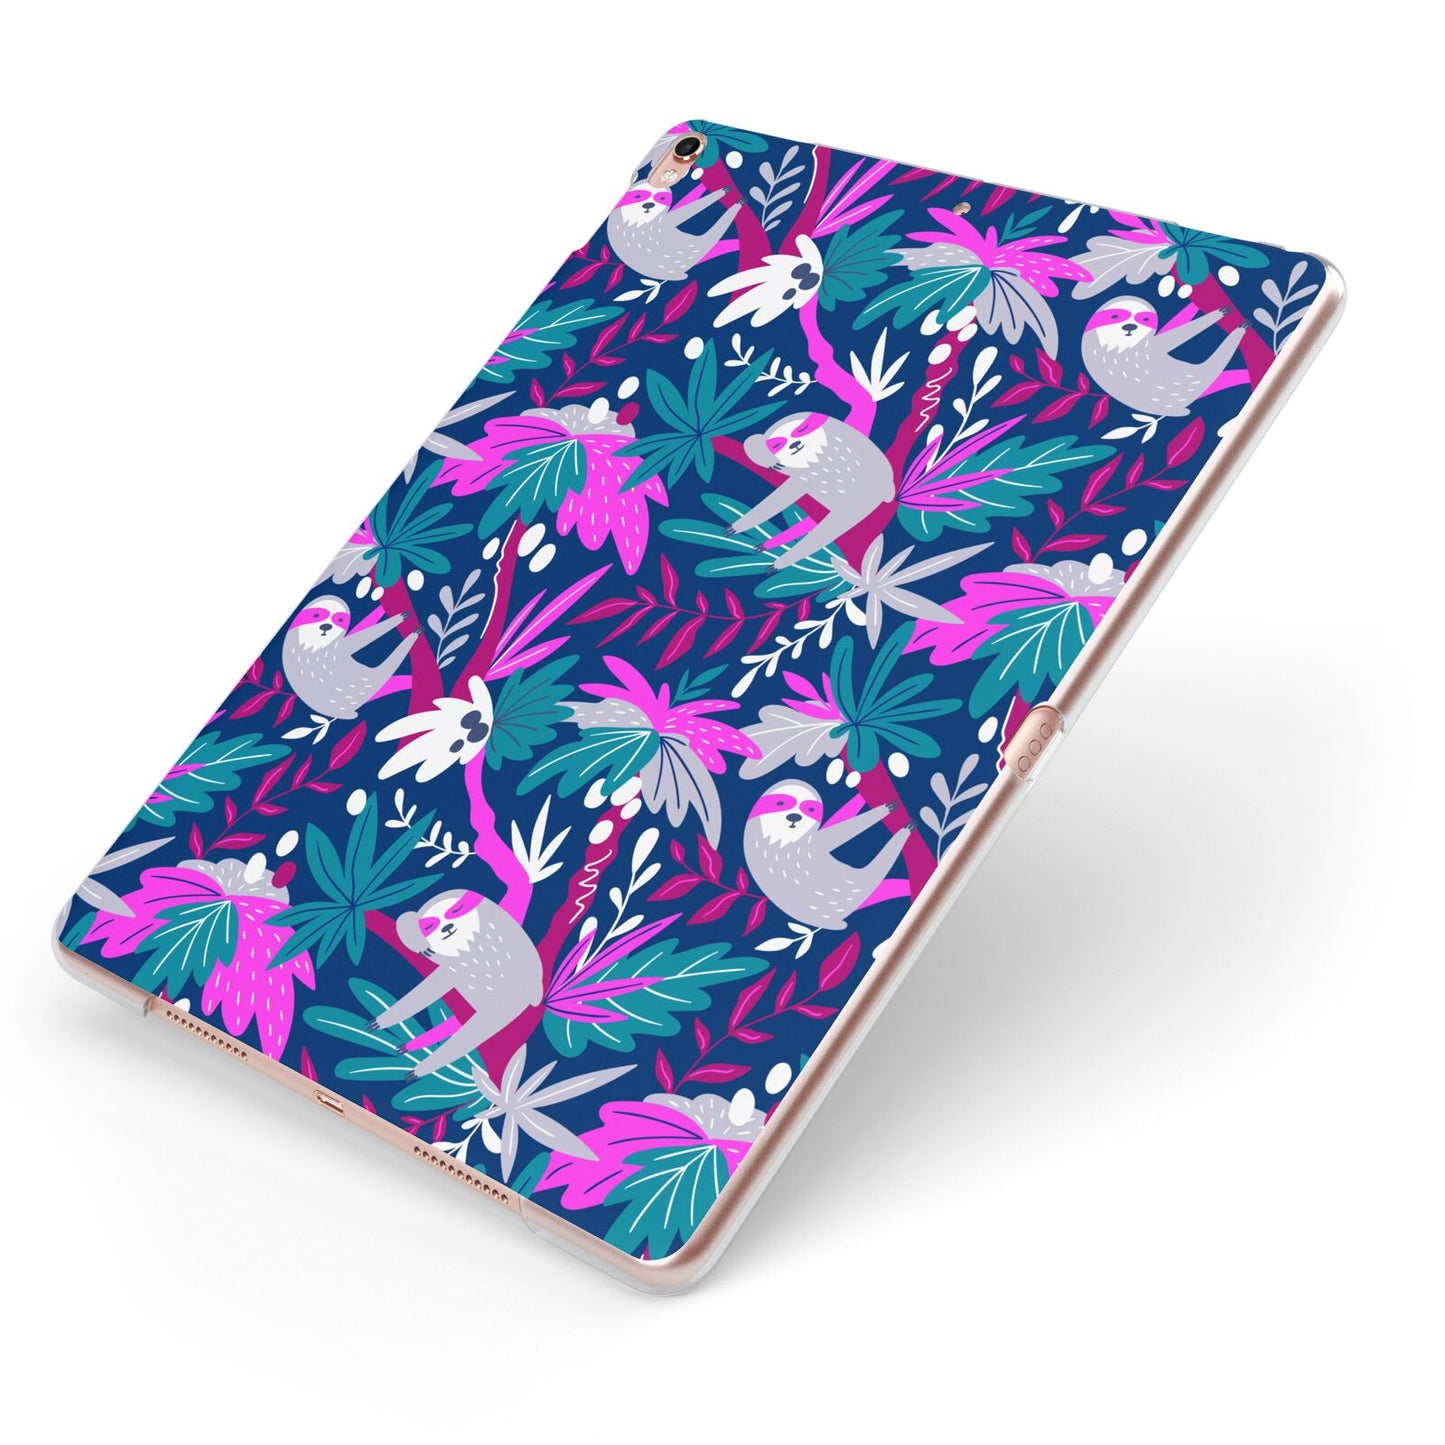 Sloth Apple iPad Case on Rose Gold iPad Side View